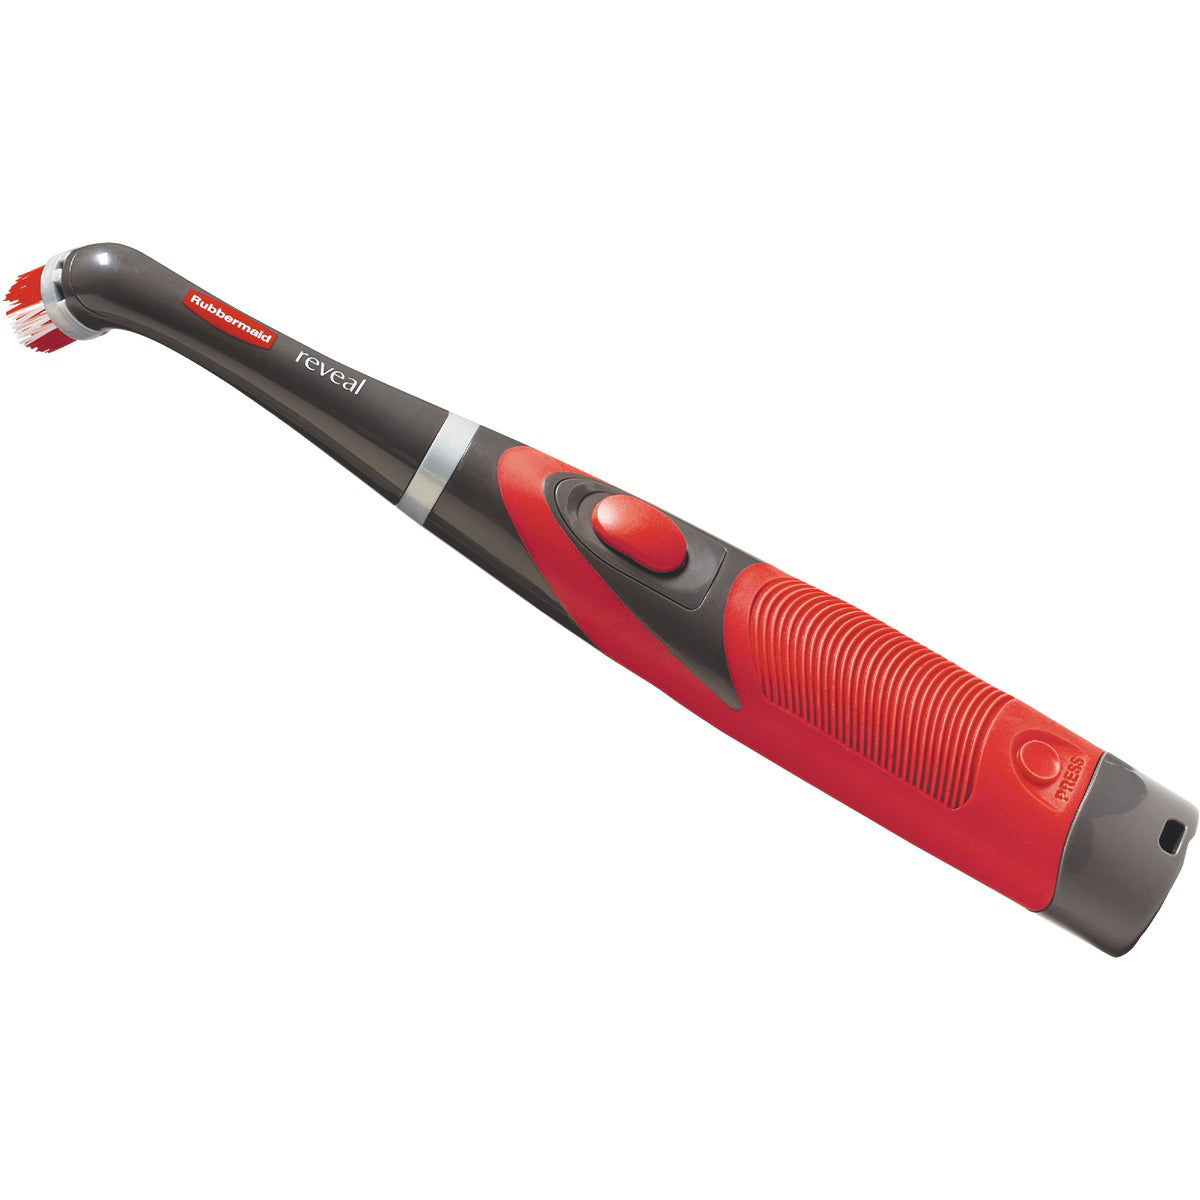 NEW Rubbermaid Reveal Replacement Head Brush Grout & Corner Power Scrubber